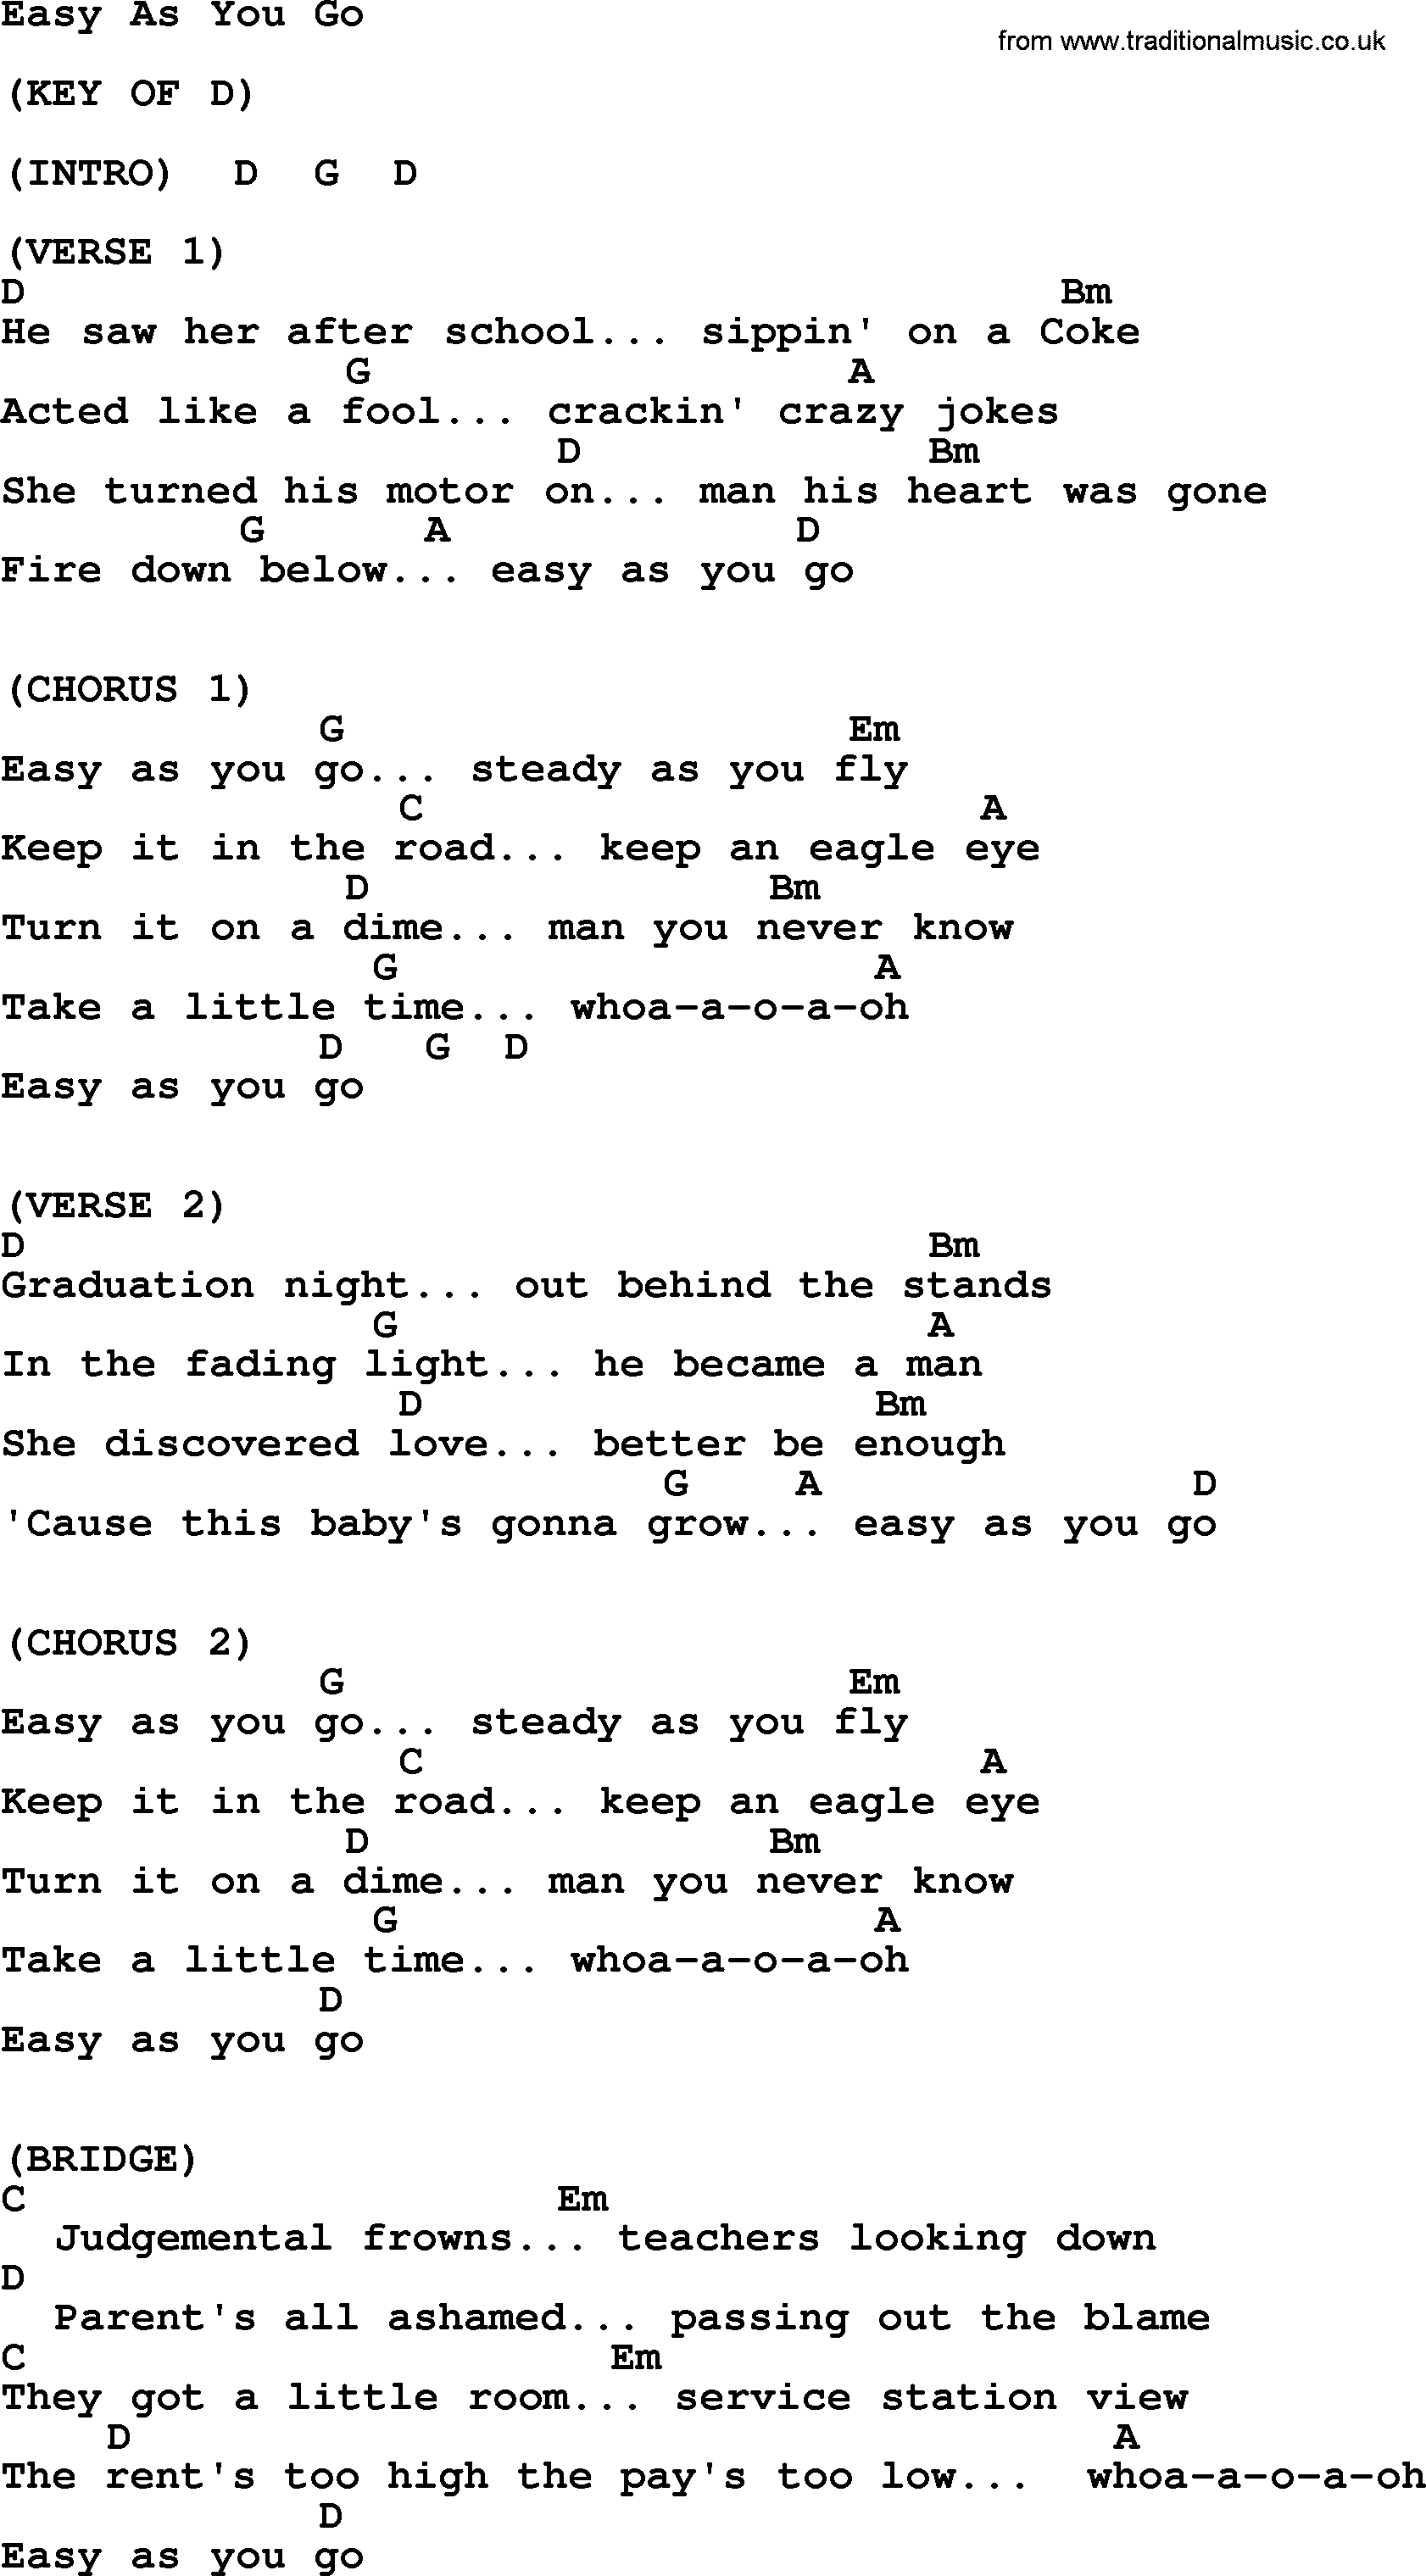 George Strait song: Easy As You Go, lyrics and chords